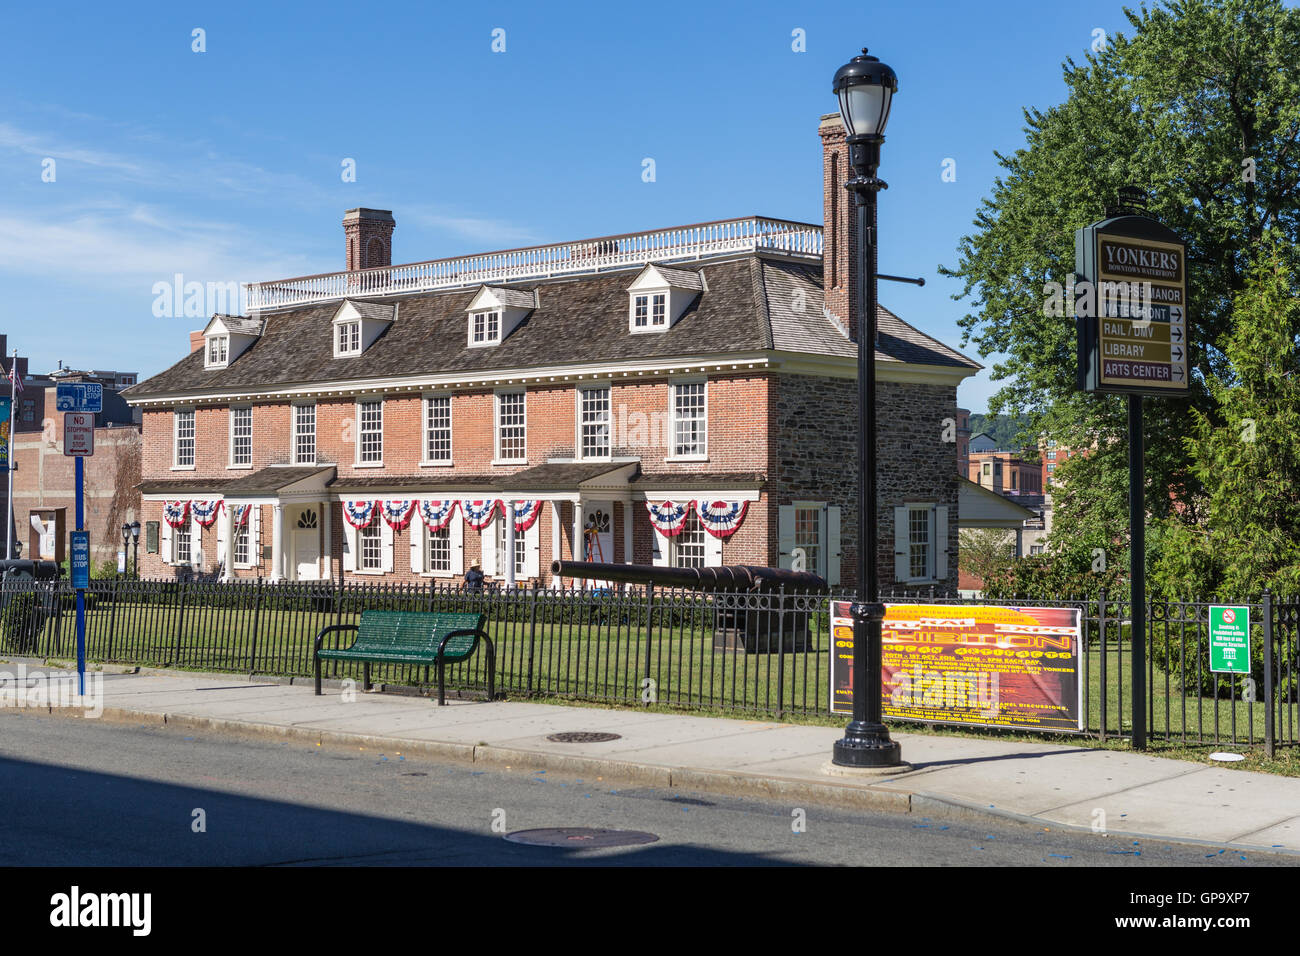 The historic colonial era Philipse Manor Hall in downtown Yonkers, New York. Stock Photo